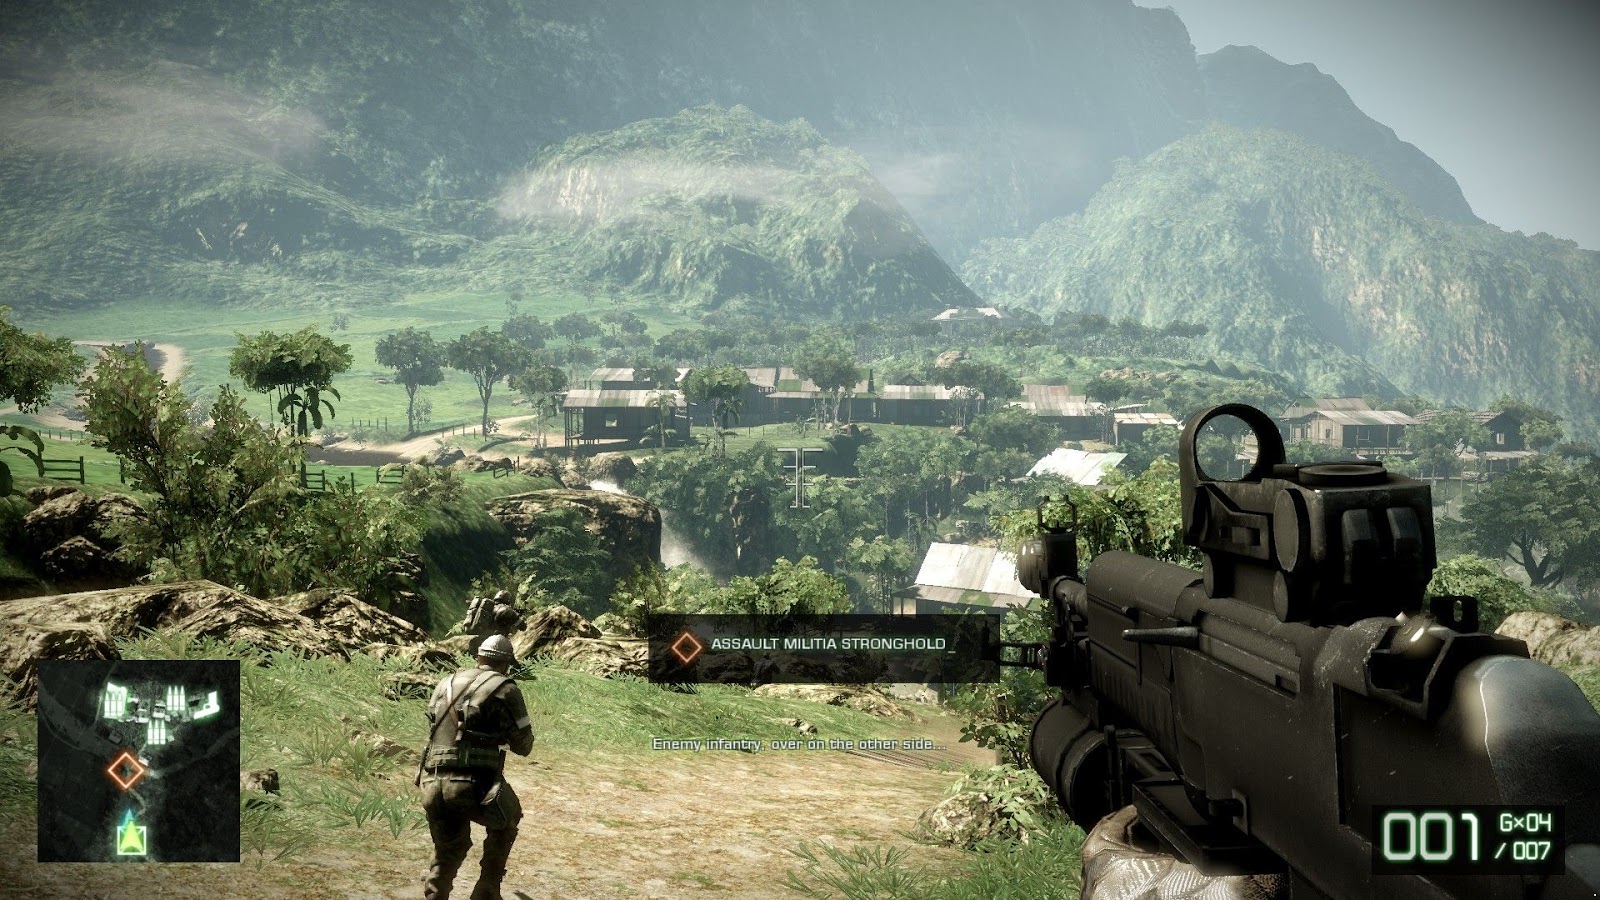 battlefield bad company 2 serial number needed to login